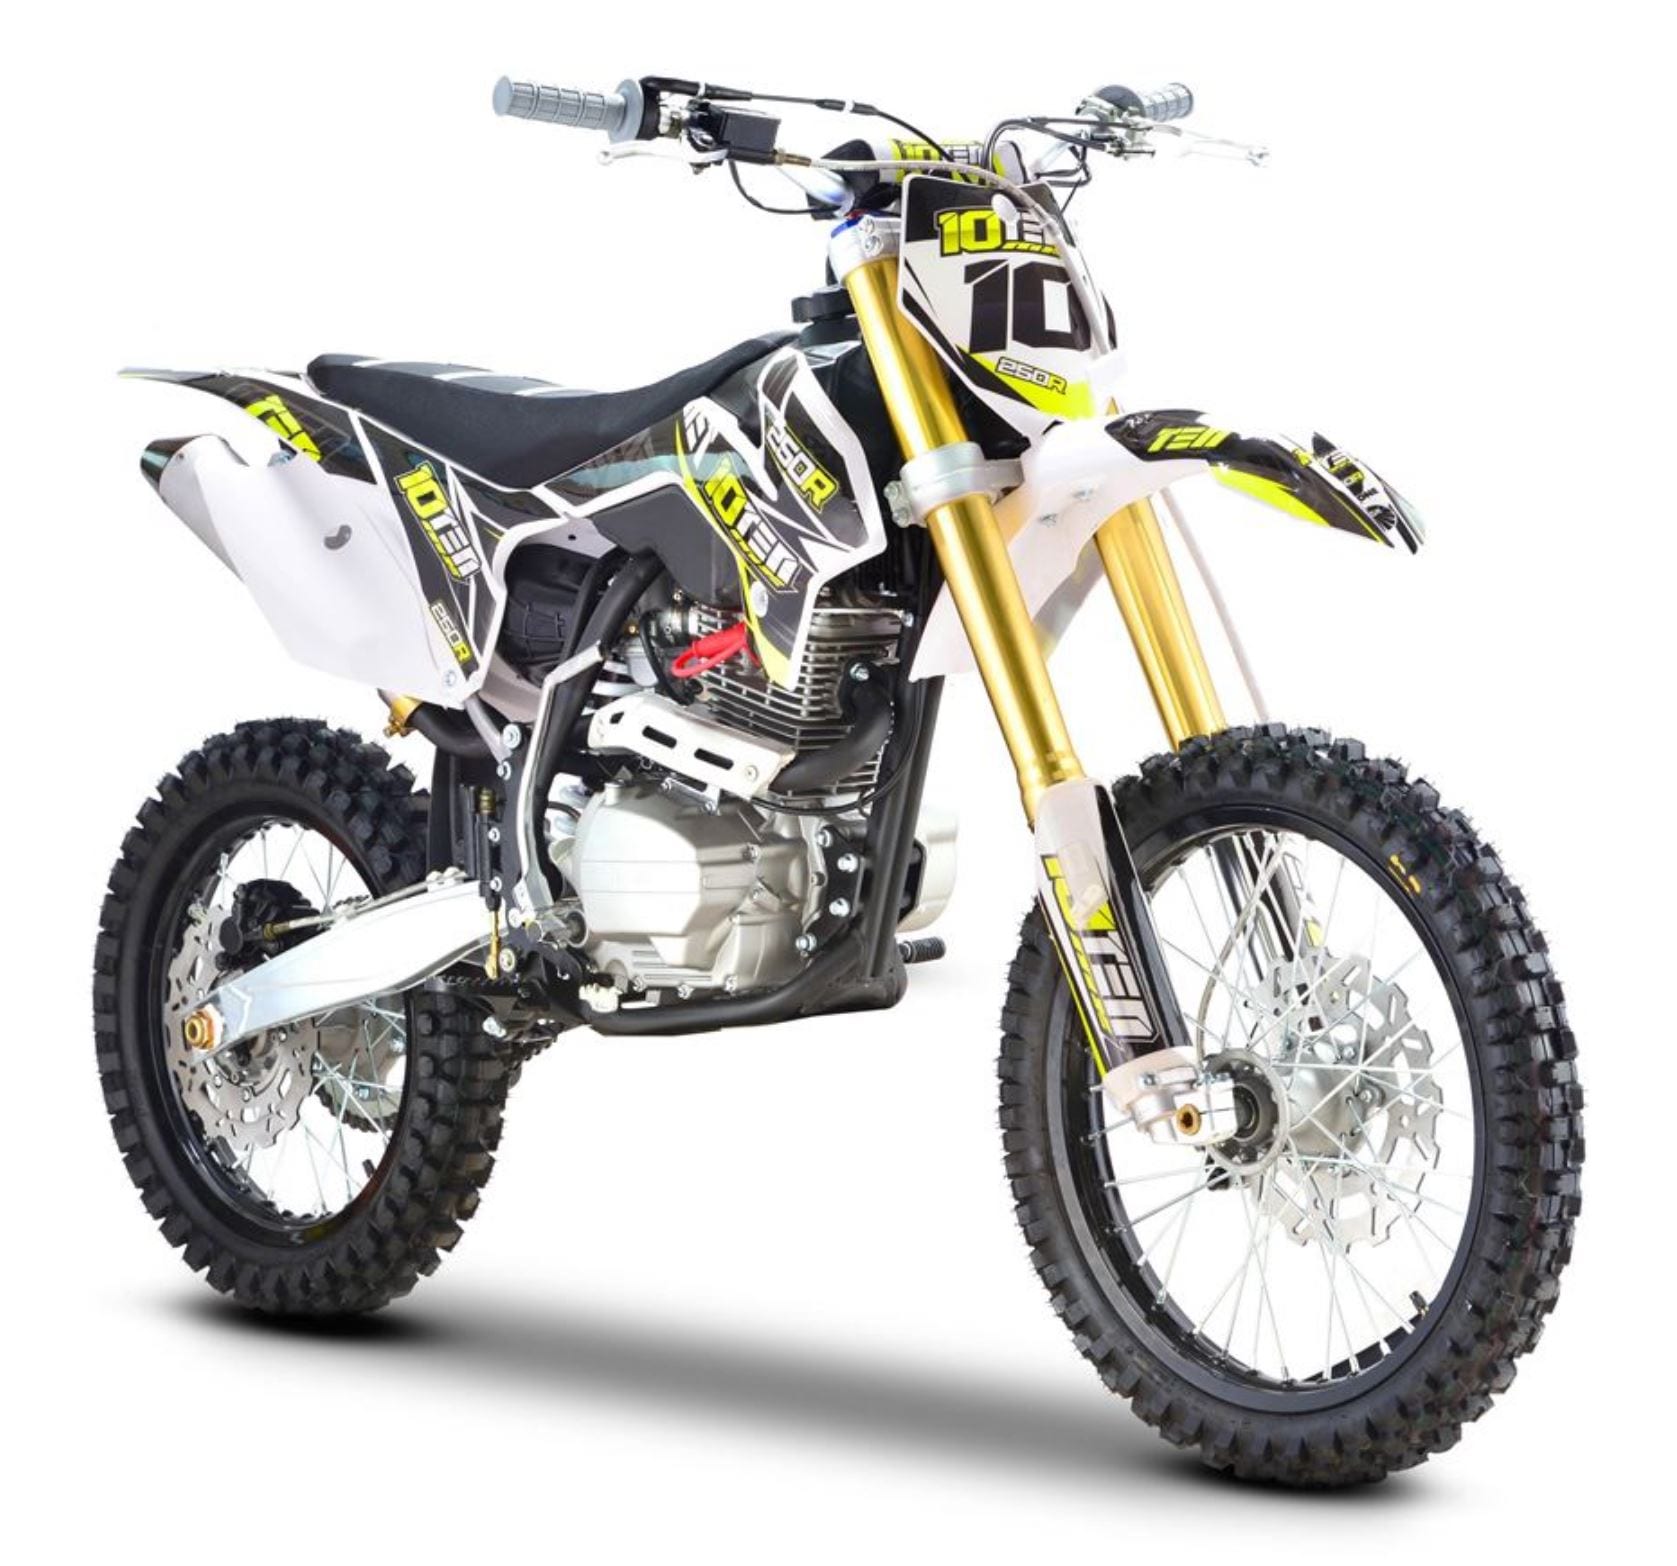 10Ten 250R Dirt Bike available at Extreme Quads, Holbeach